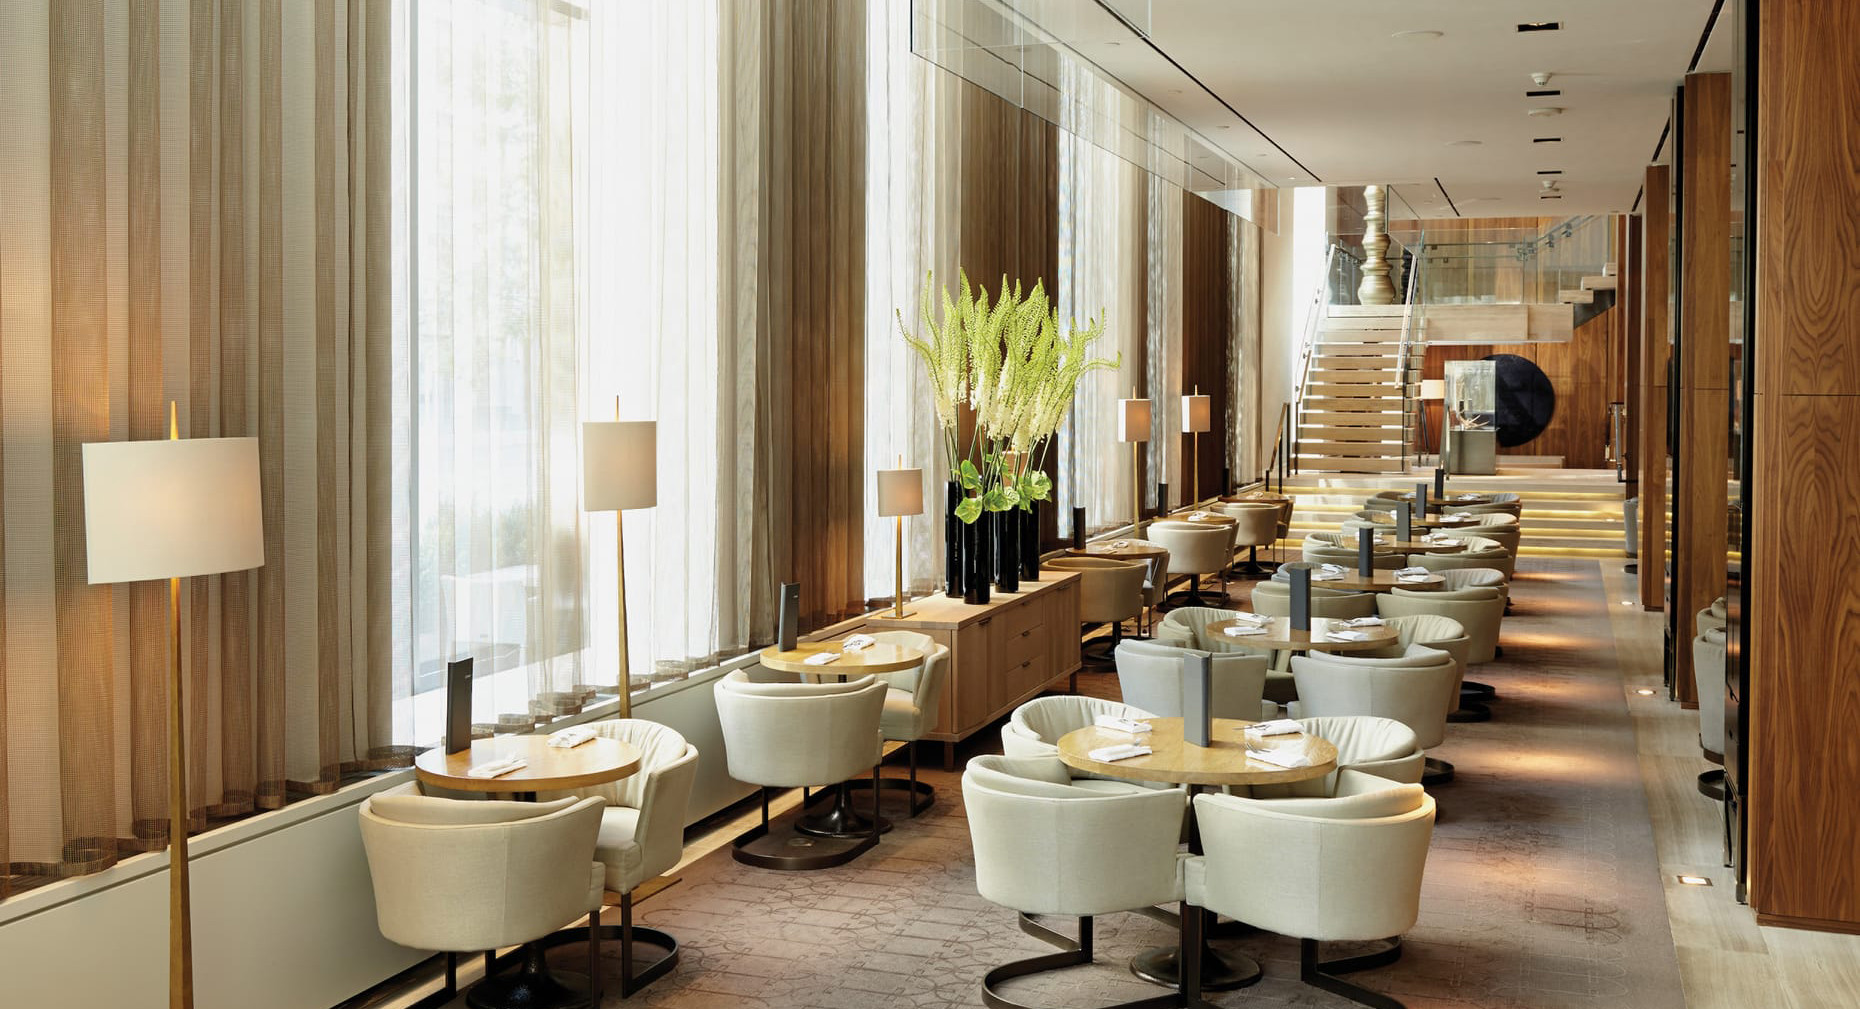 news-main-four-seasons-hotel-toronto-and-cafe-boulud-welcome-new-additions-to-culinary-team-just-in-tome-for-spring.1553775113.jpg